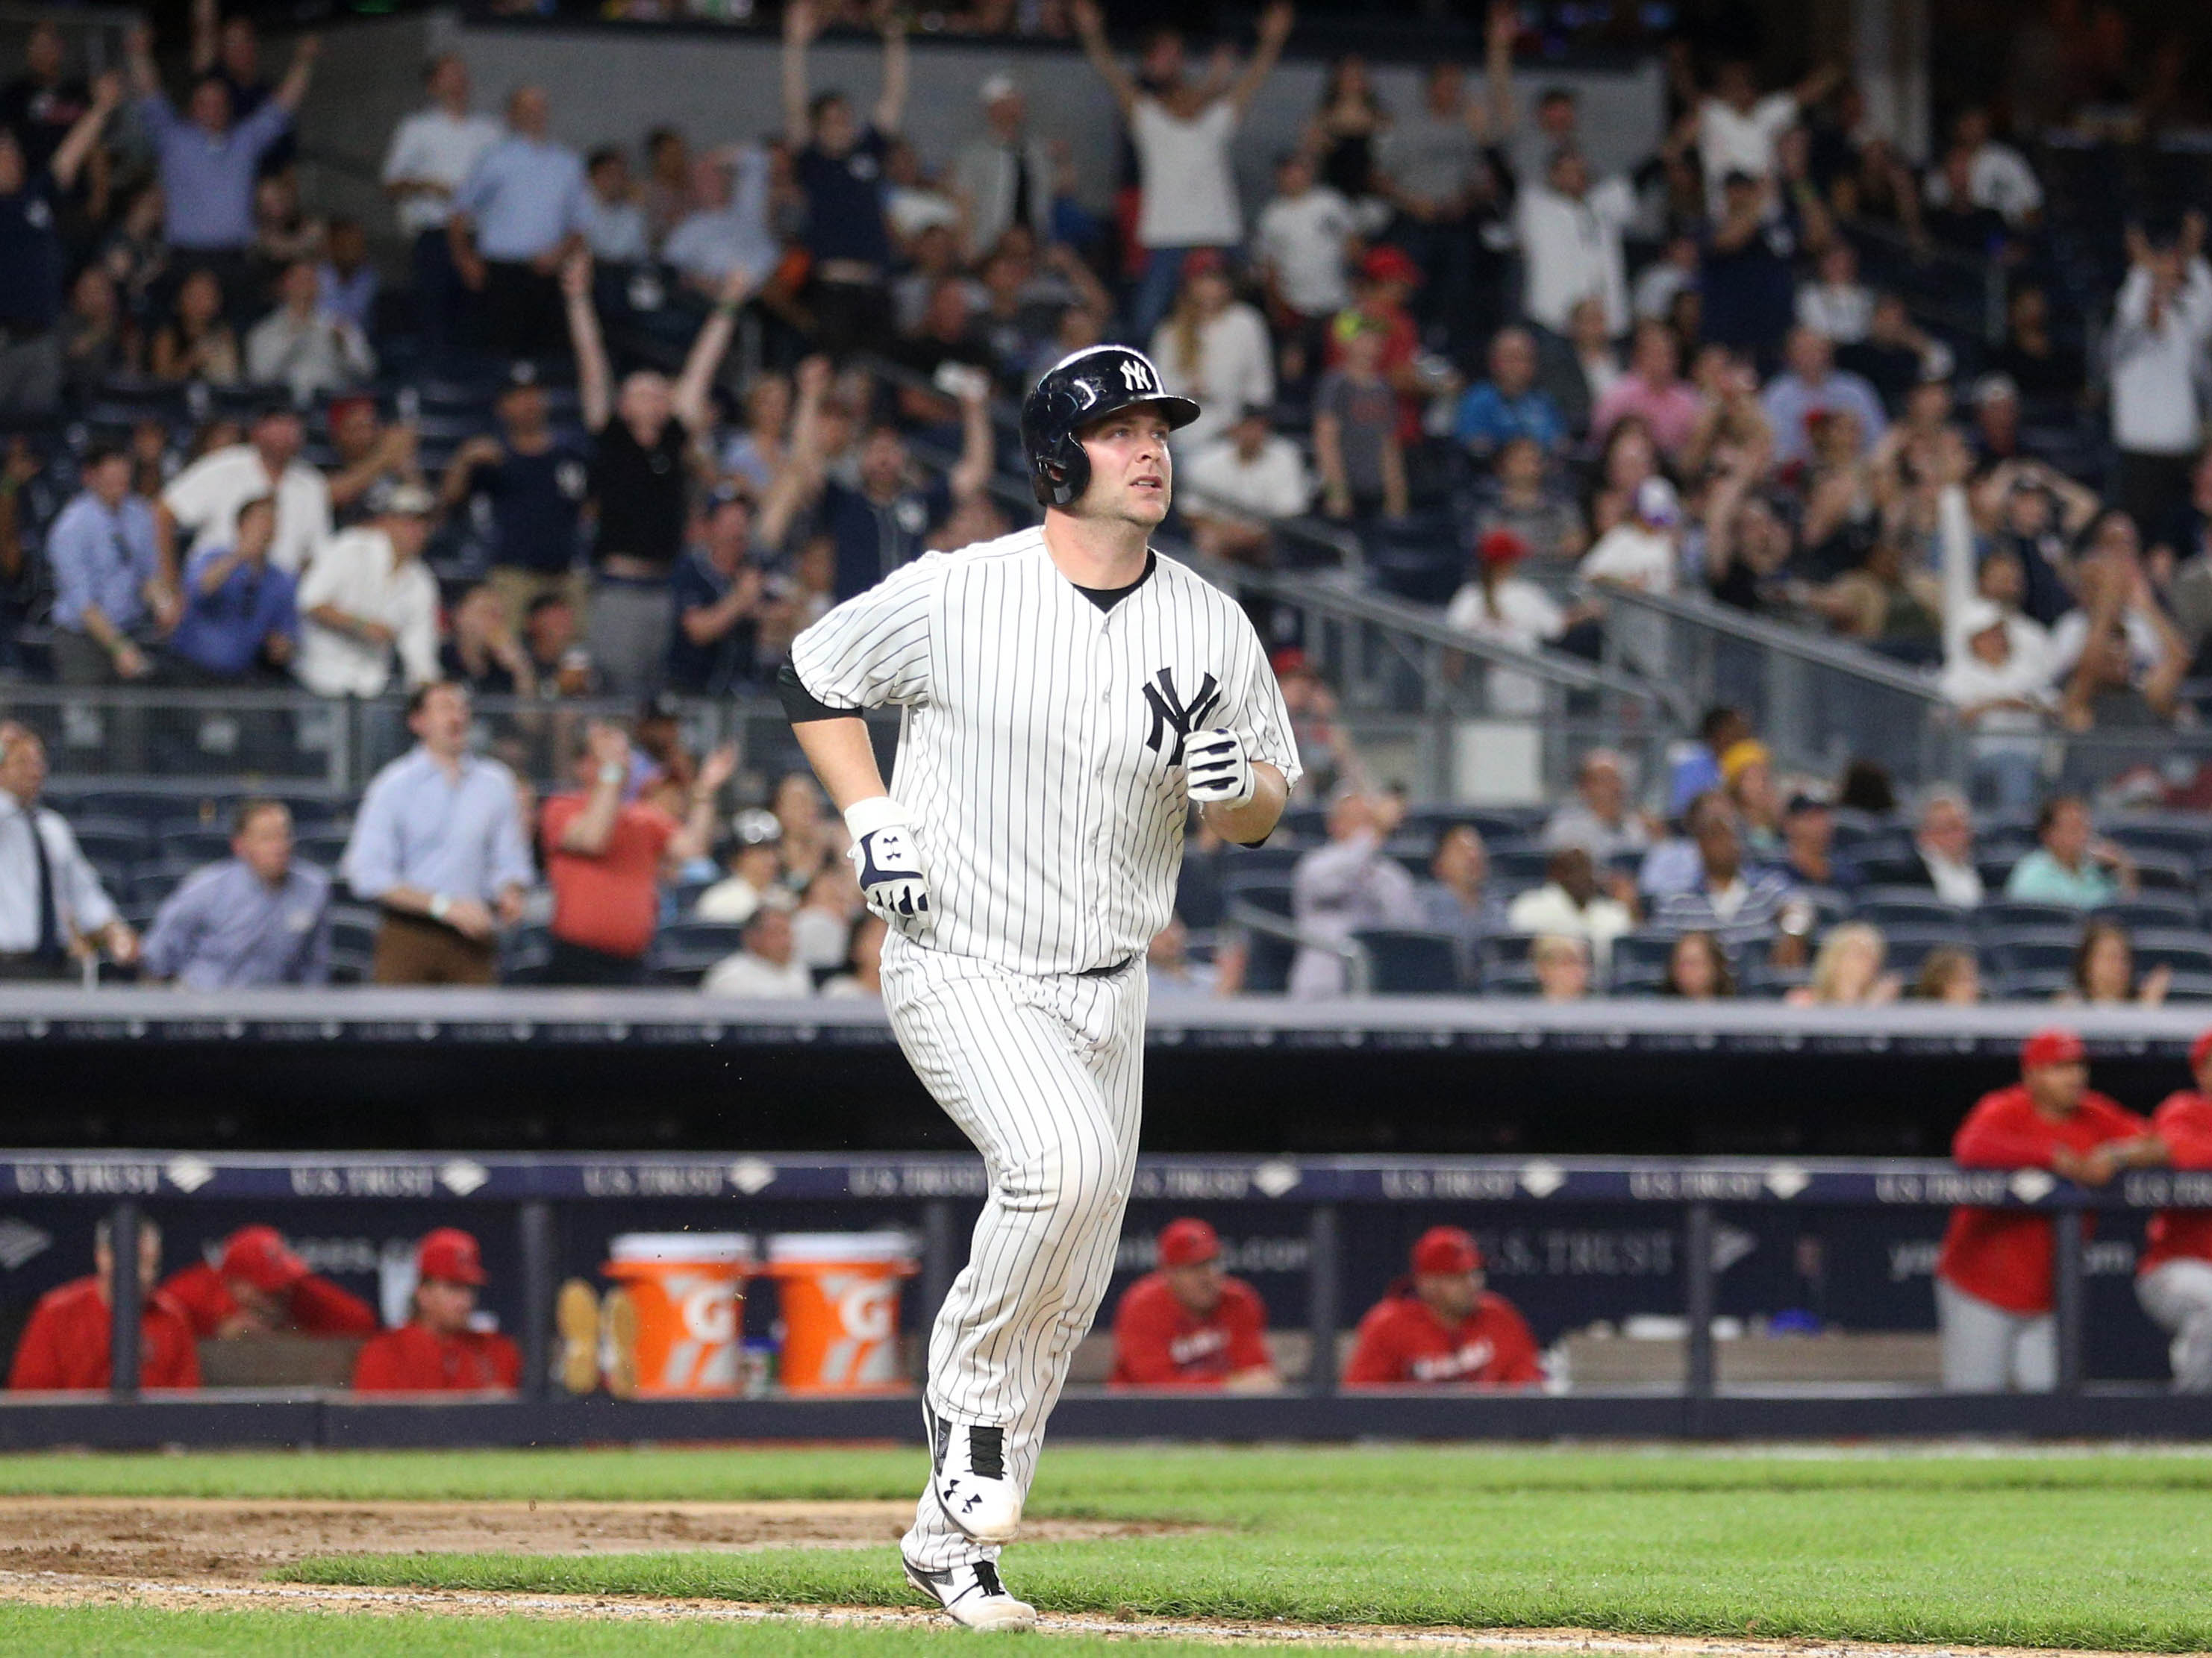 Yankees sign Brian McCann: What number will he wear? - Pinstripe Alley